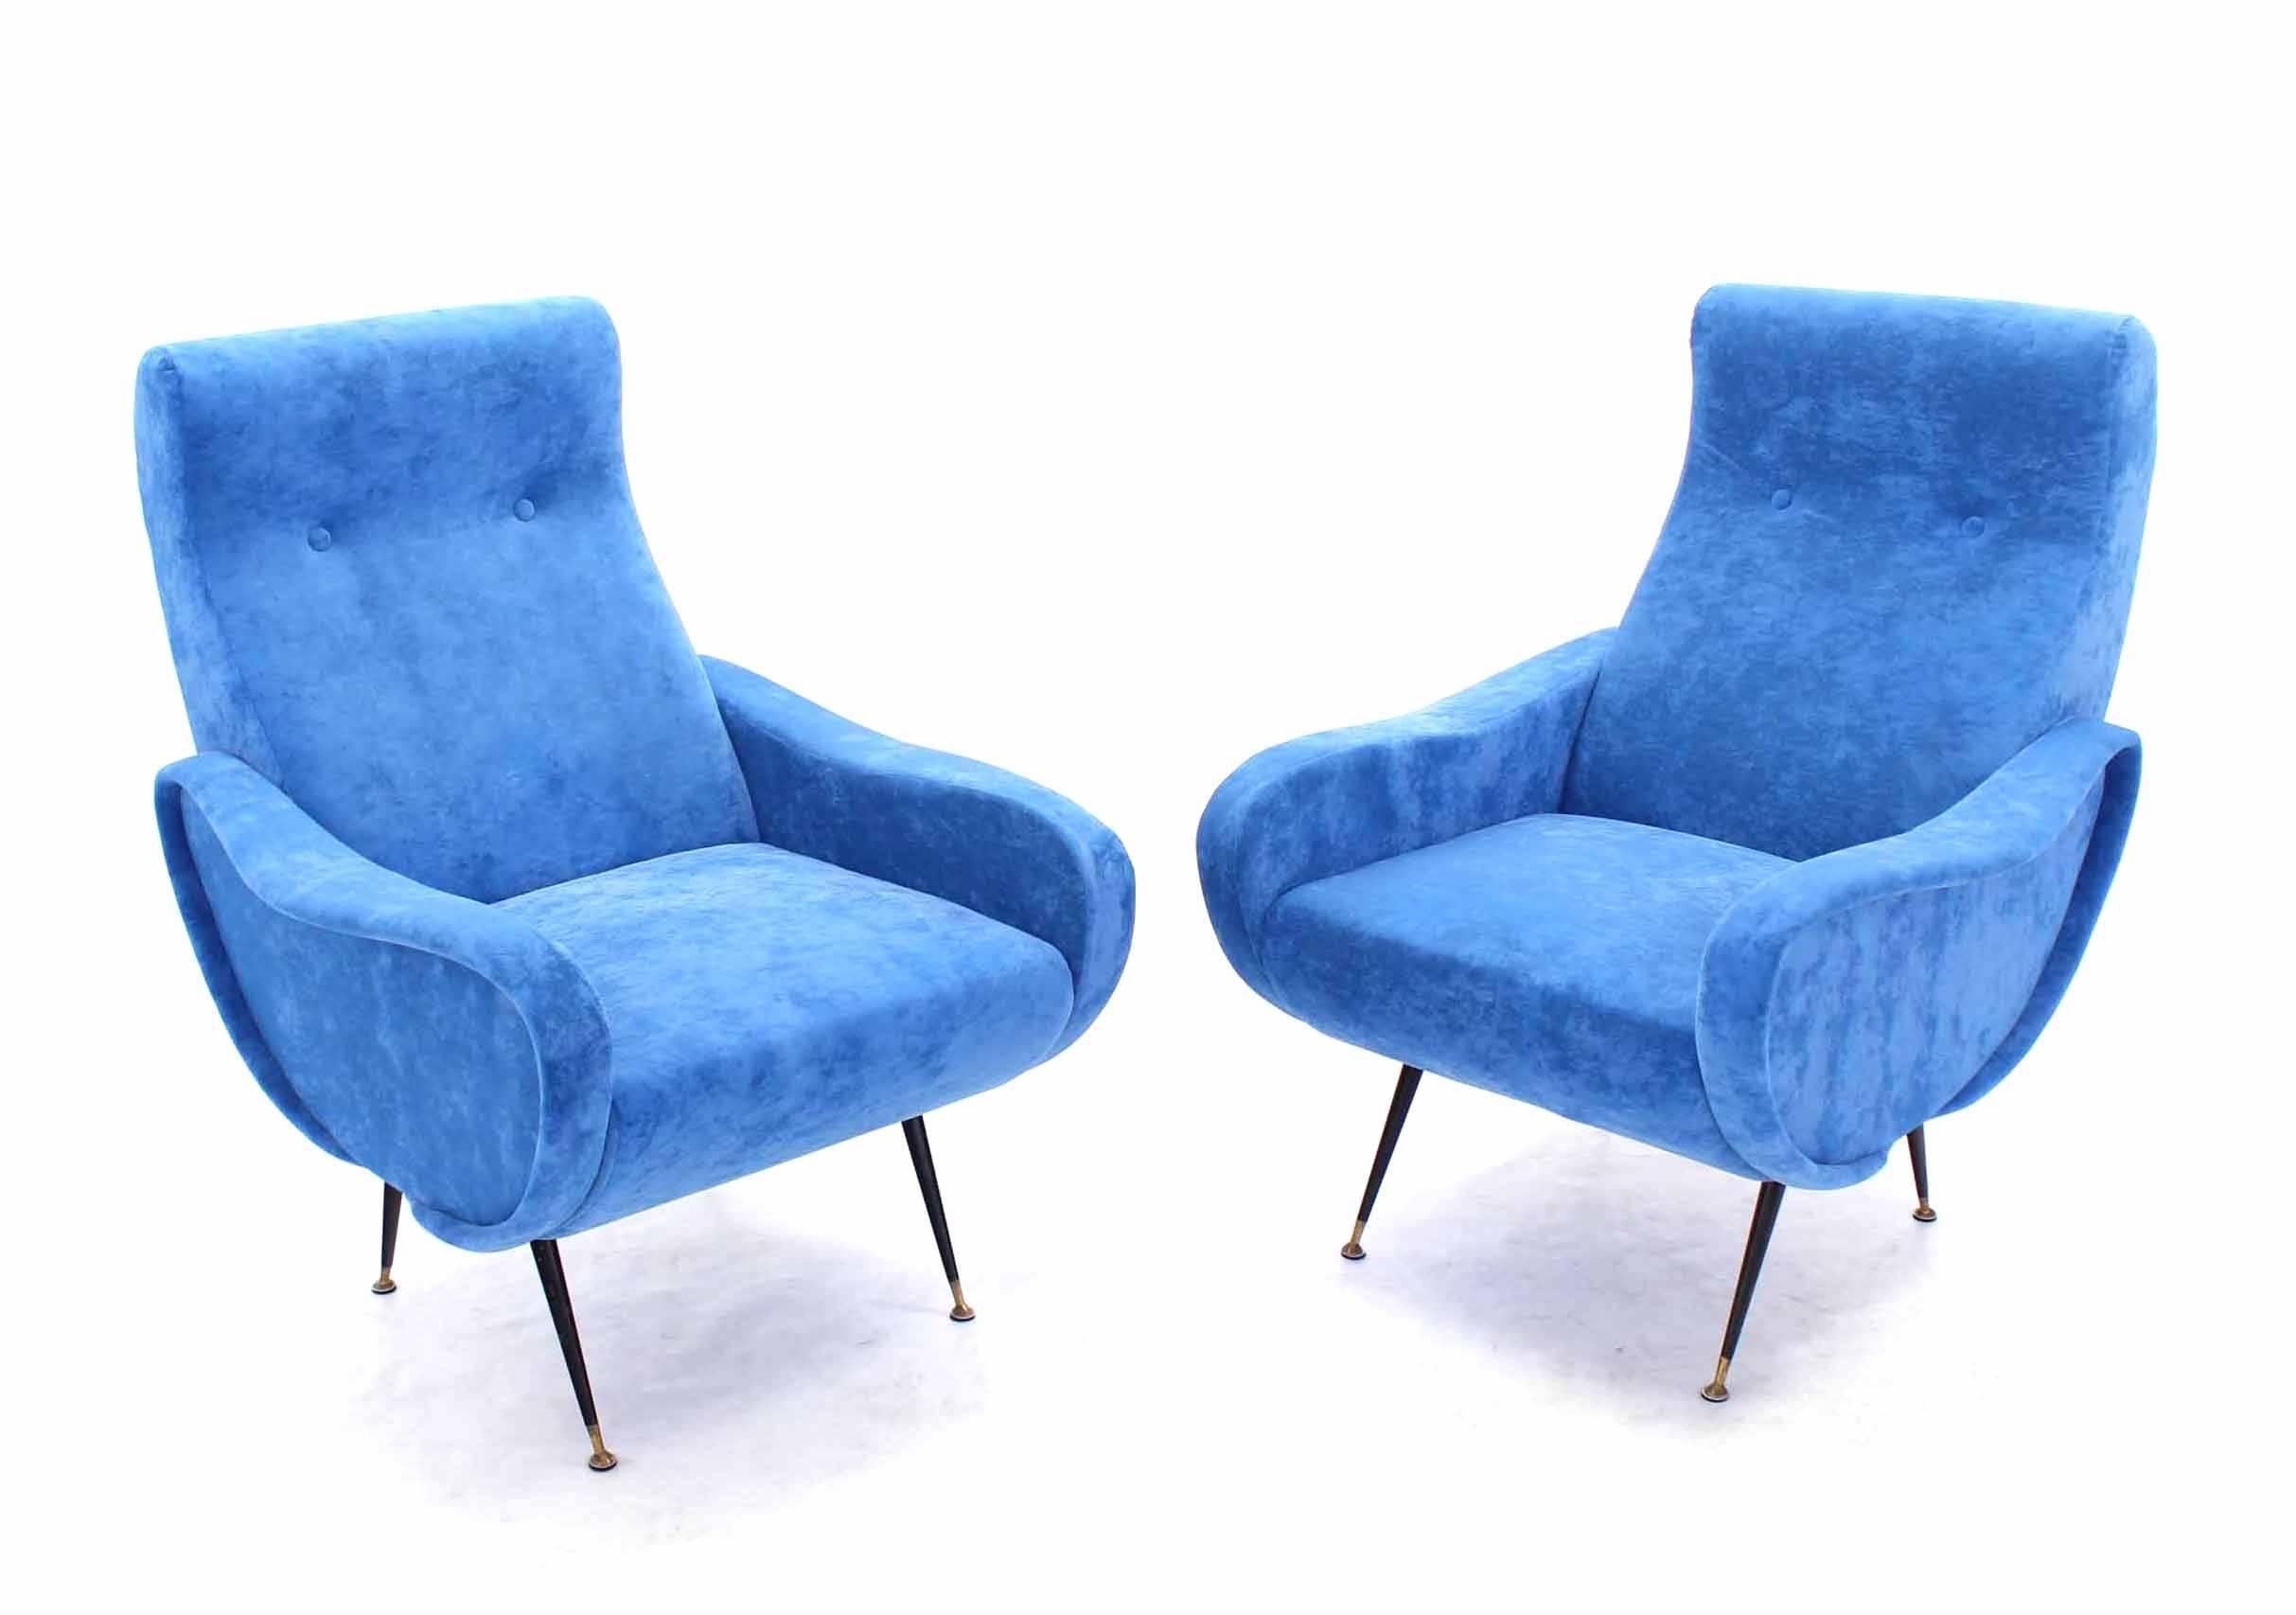 Pair of Mid-Century Italian Modern Blue Upholstery Lounge Chairs 2